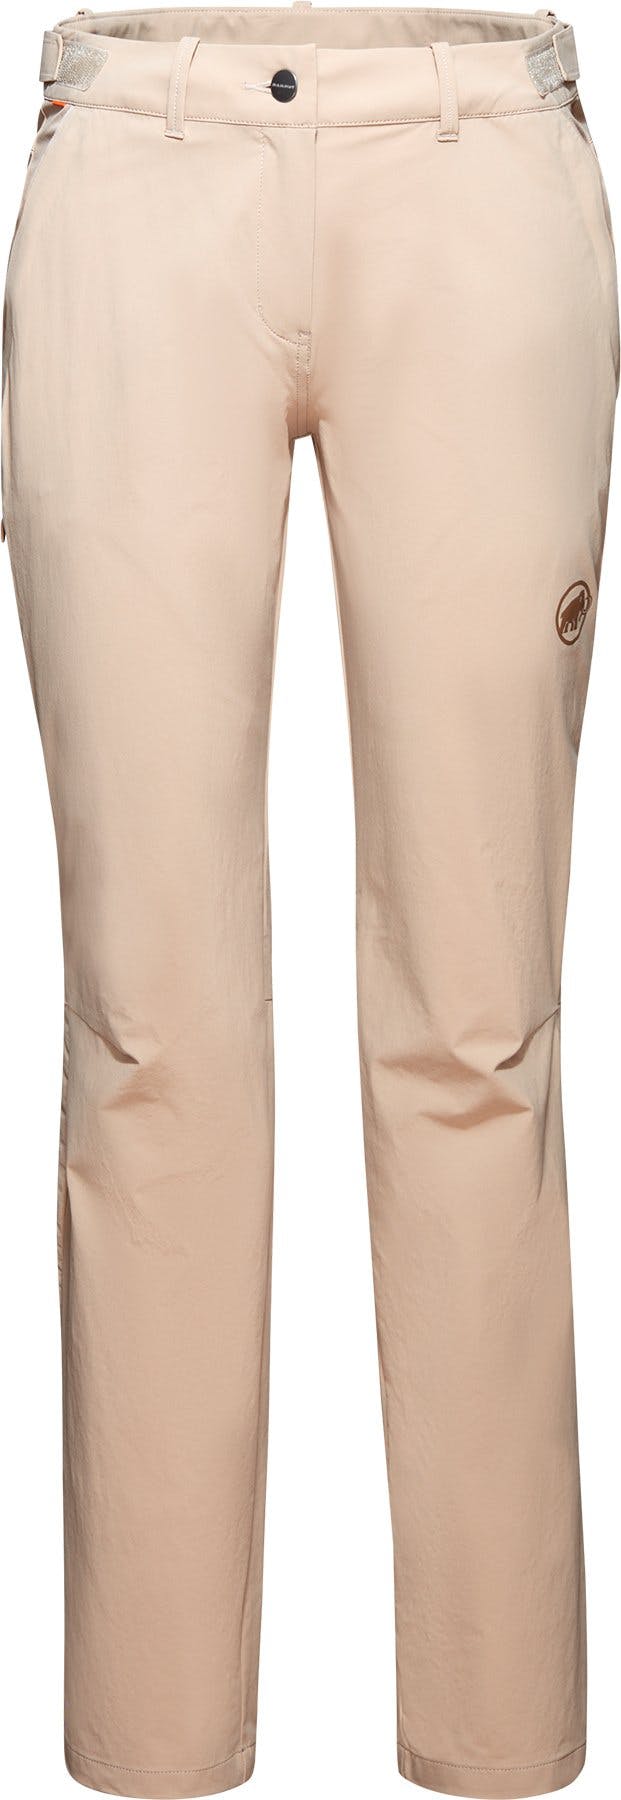 Product image for Runbold Pants - Women's